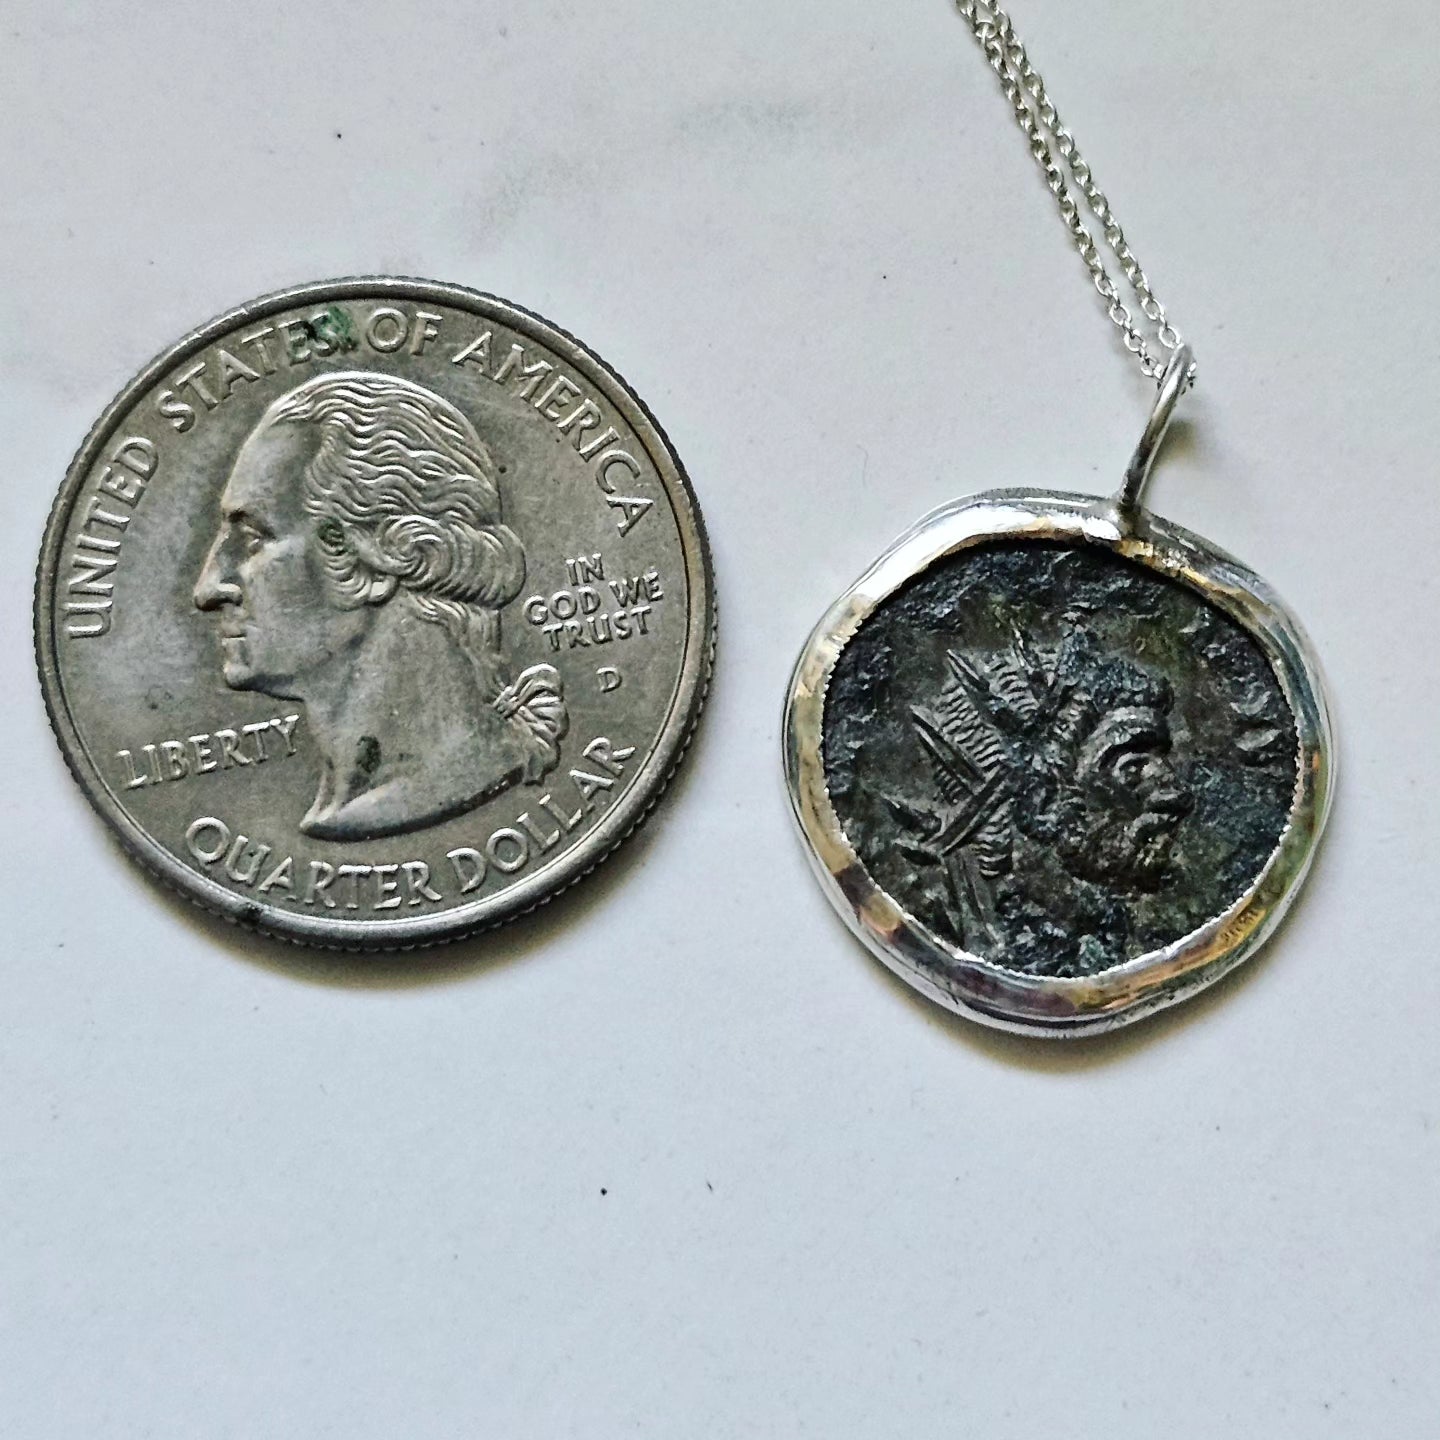 "When in Rome": Ancient Roman Coin Necklace (Claudius II Gothicus/Altar)